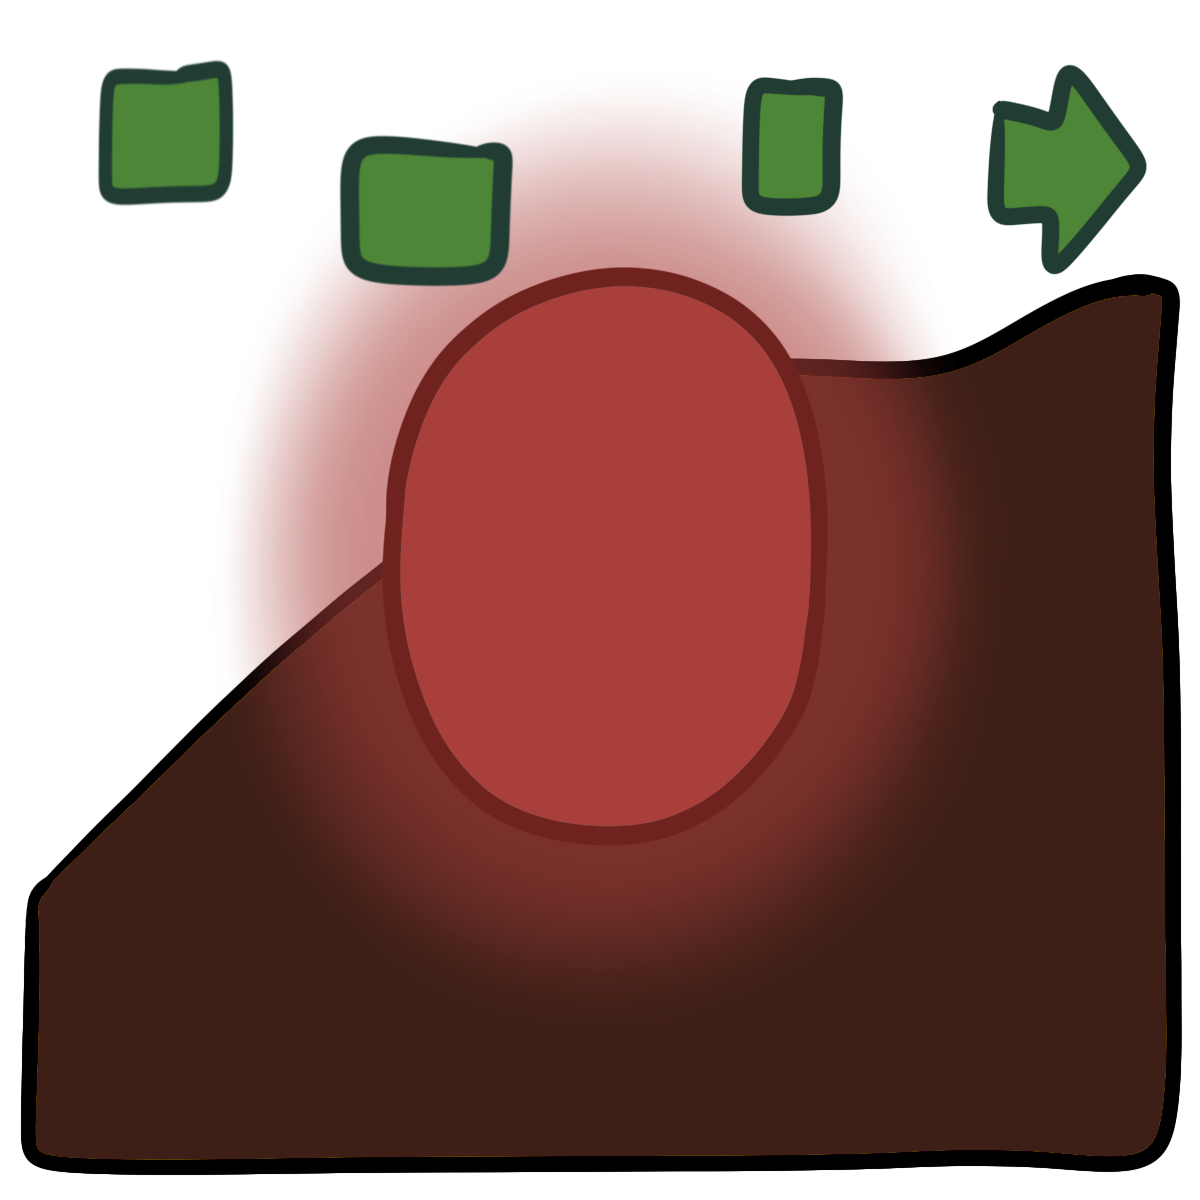 A green arrow pointing right is broken into four offset sections with large gaps between them. There is a red glowing oval in the center. Curved dark brown skin fills the bottom half of the background.